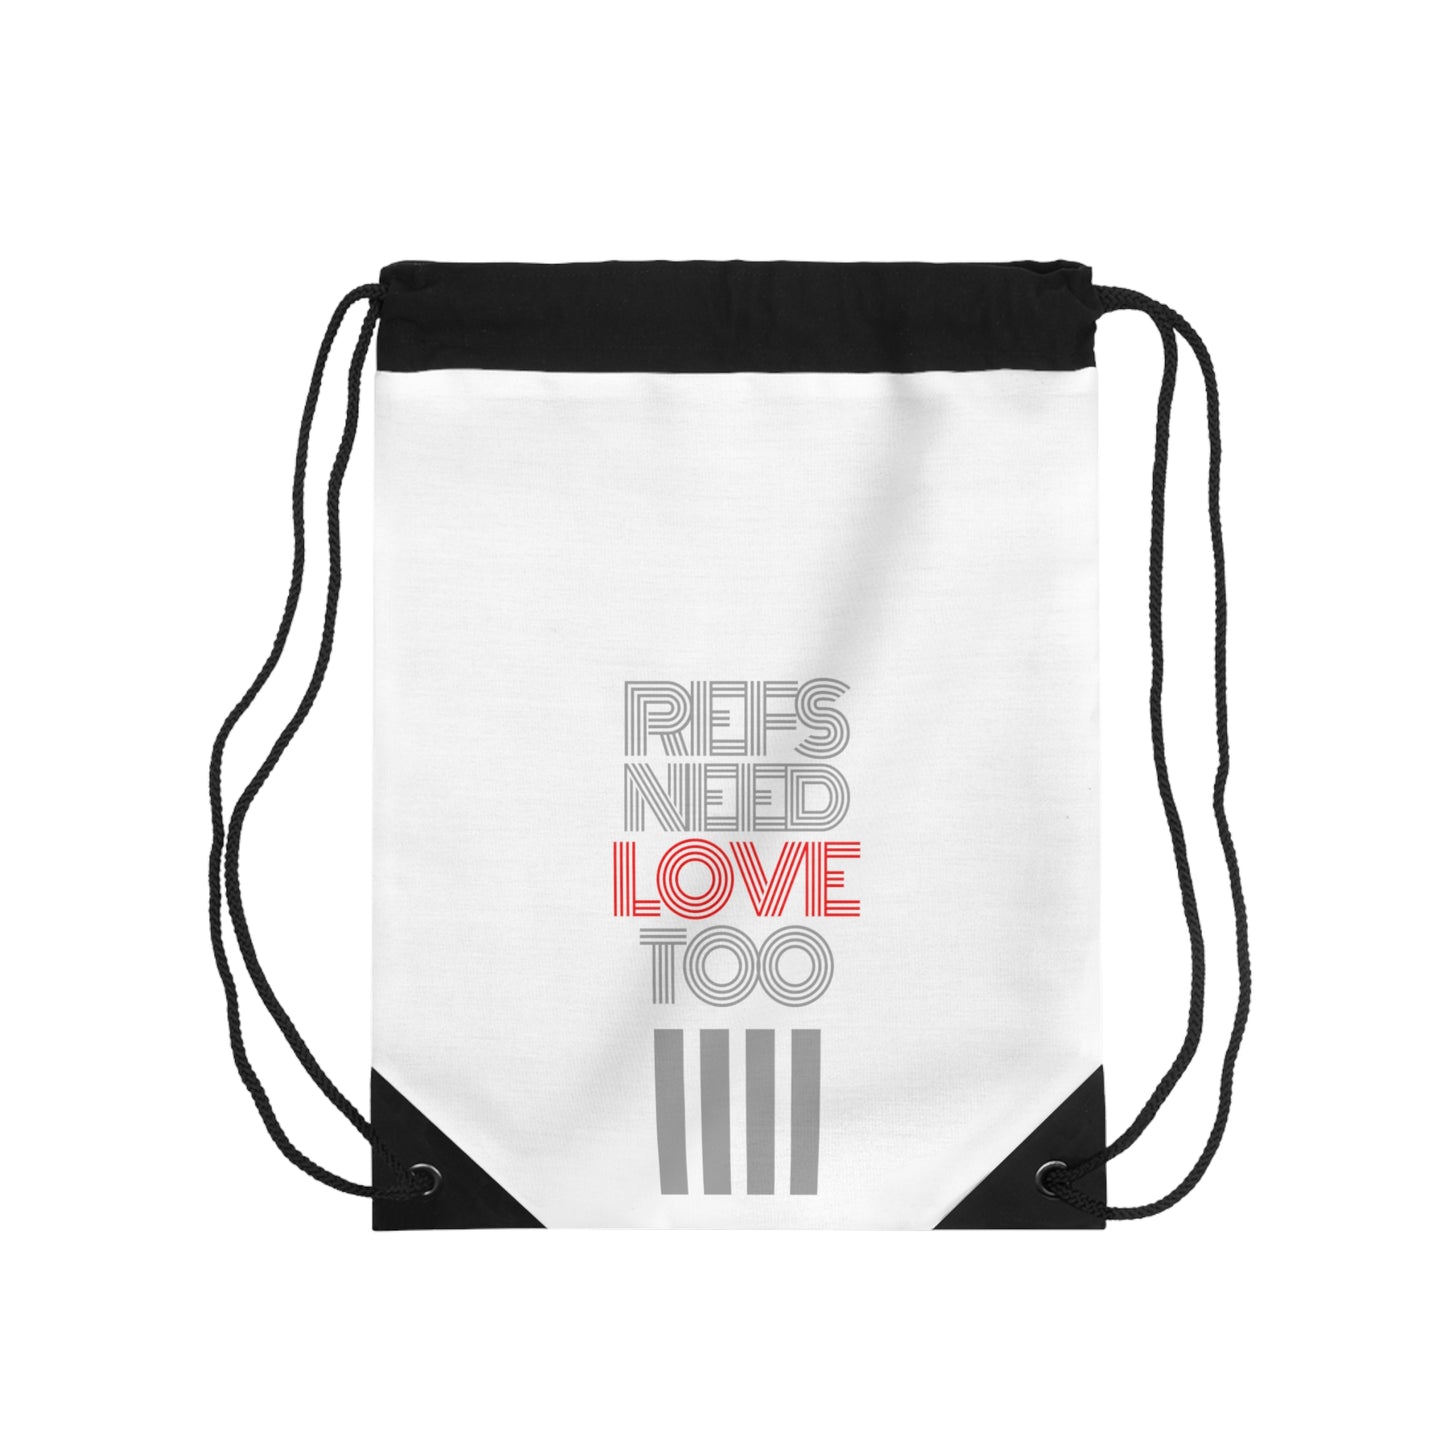 Refs Need Love Too Drawstring Bag | Perfect Referee Shoe Bag | Gifts for Refs | White Lightweight Shoe Tote | Ref Gym Bag | For sports officials